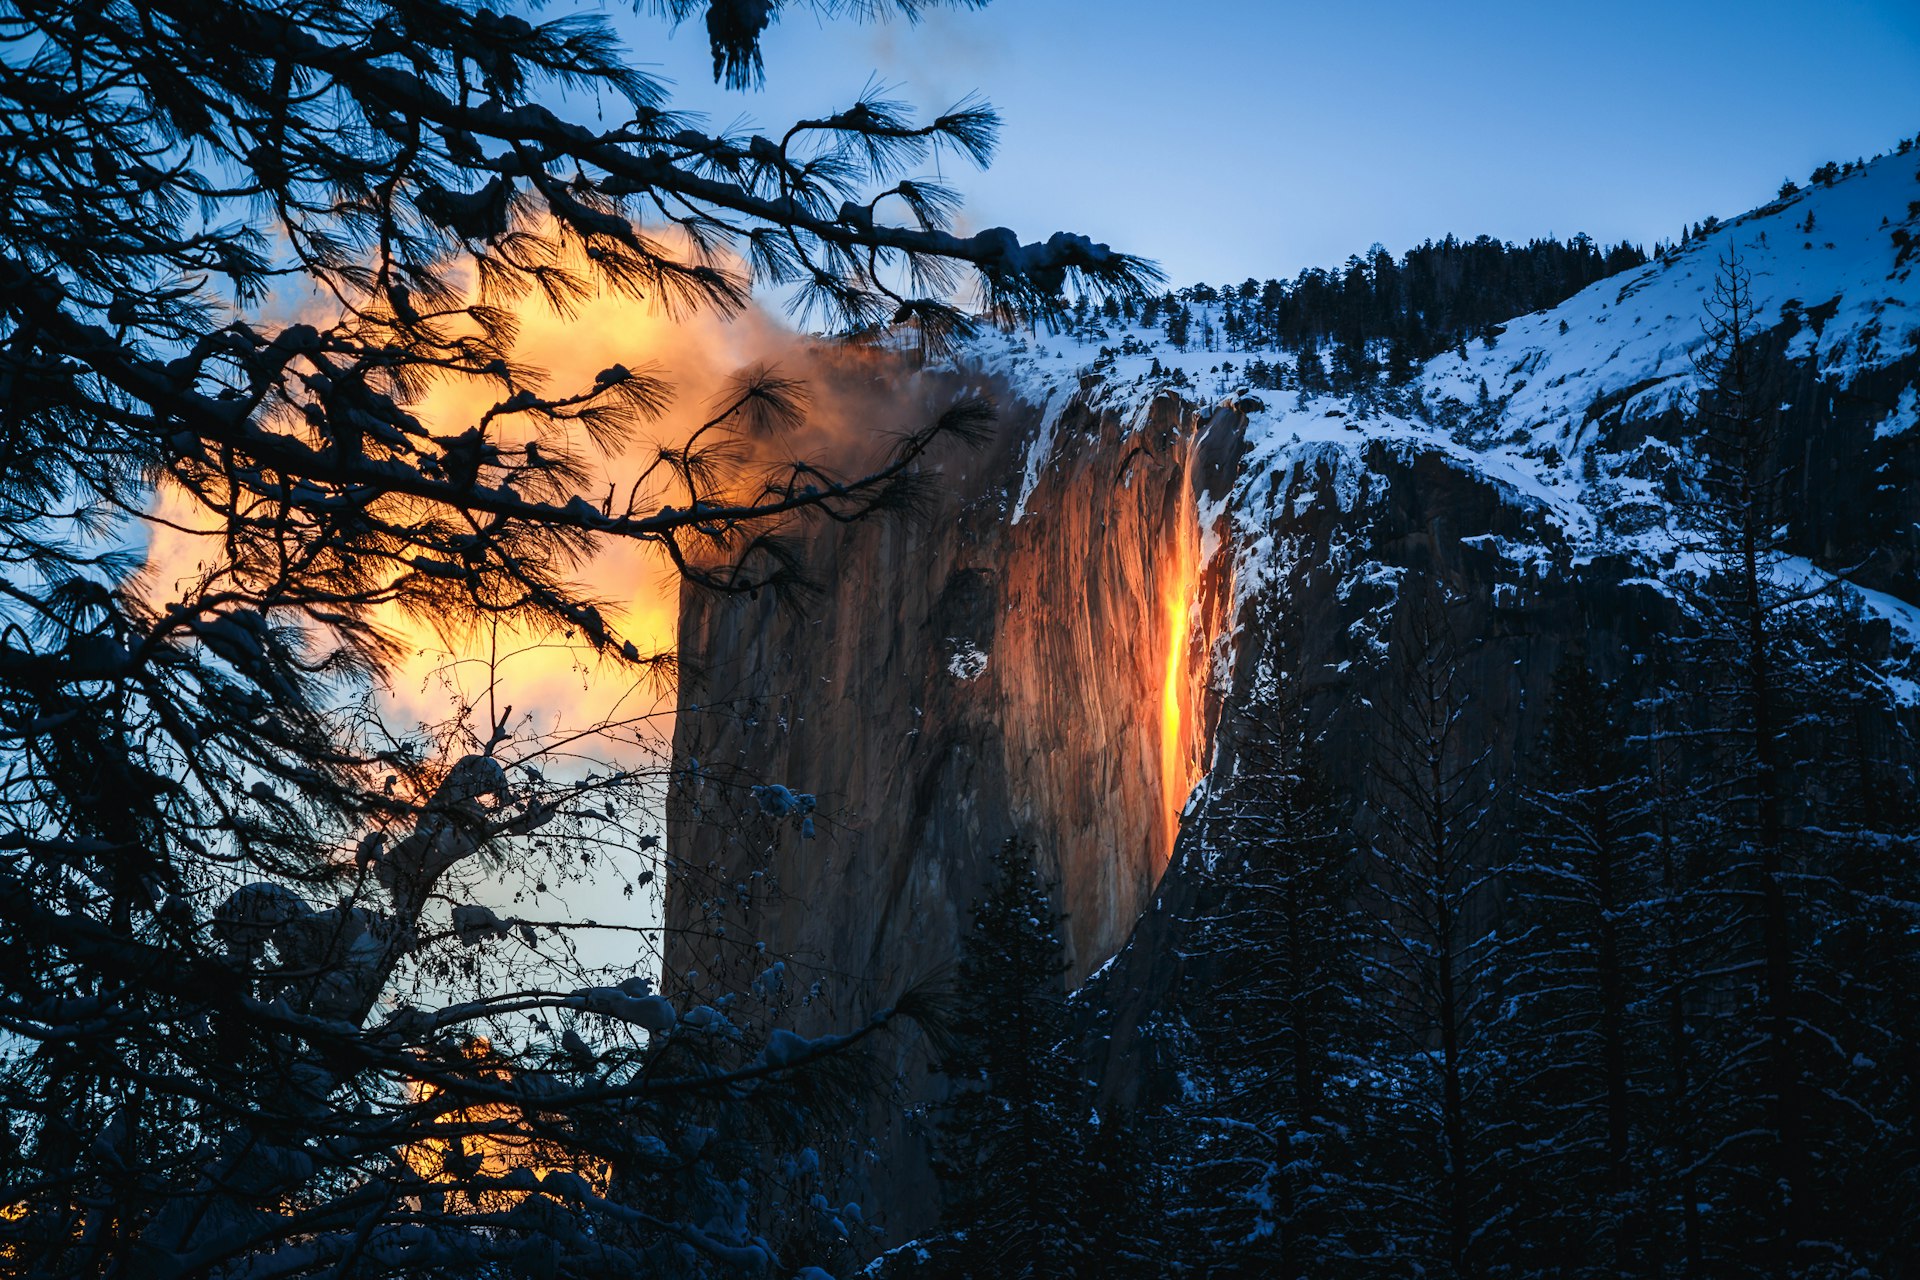 A view of El Capitan mountain in Yosemite shows the "firefall" - a natural phenomenon when a waterfall appears as though it's glowing. 